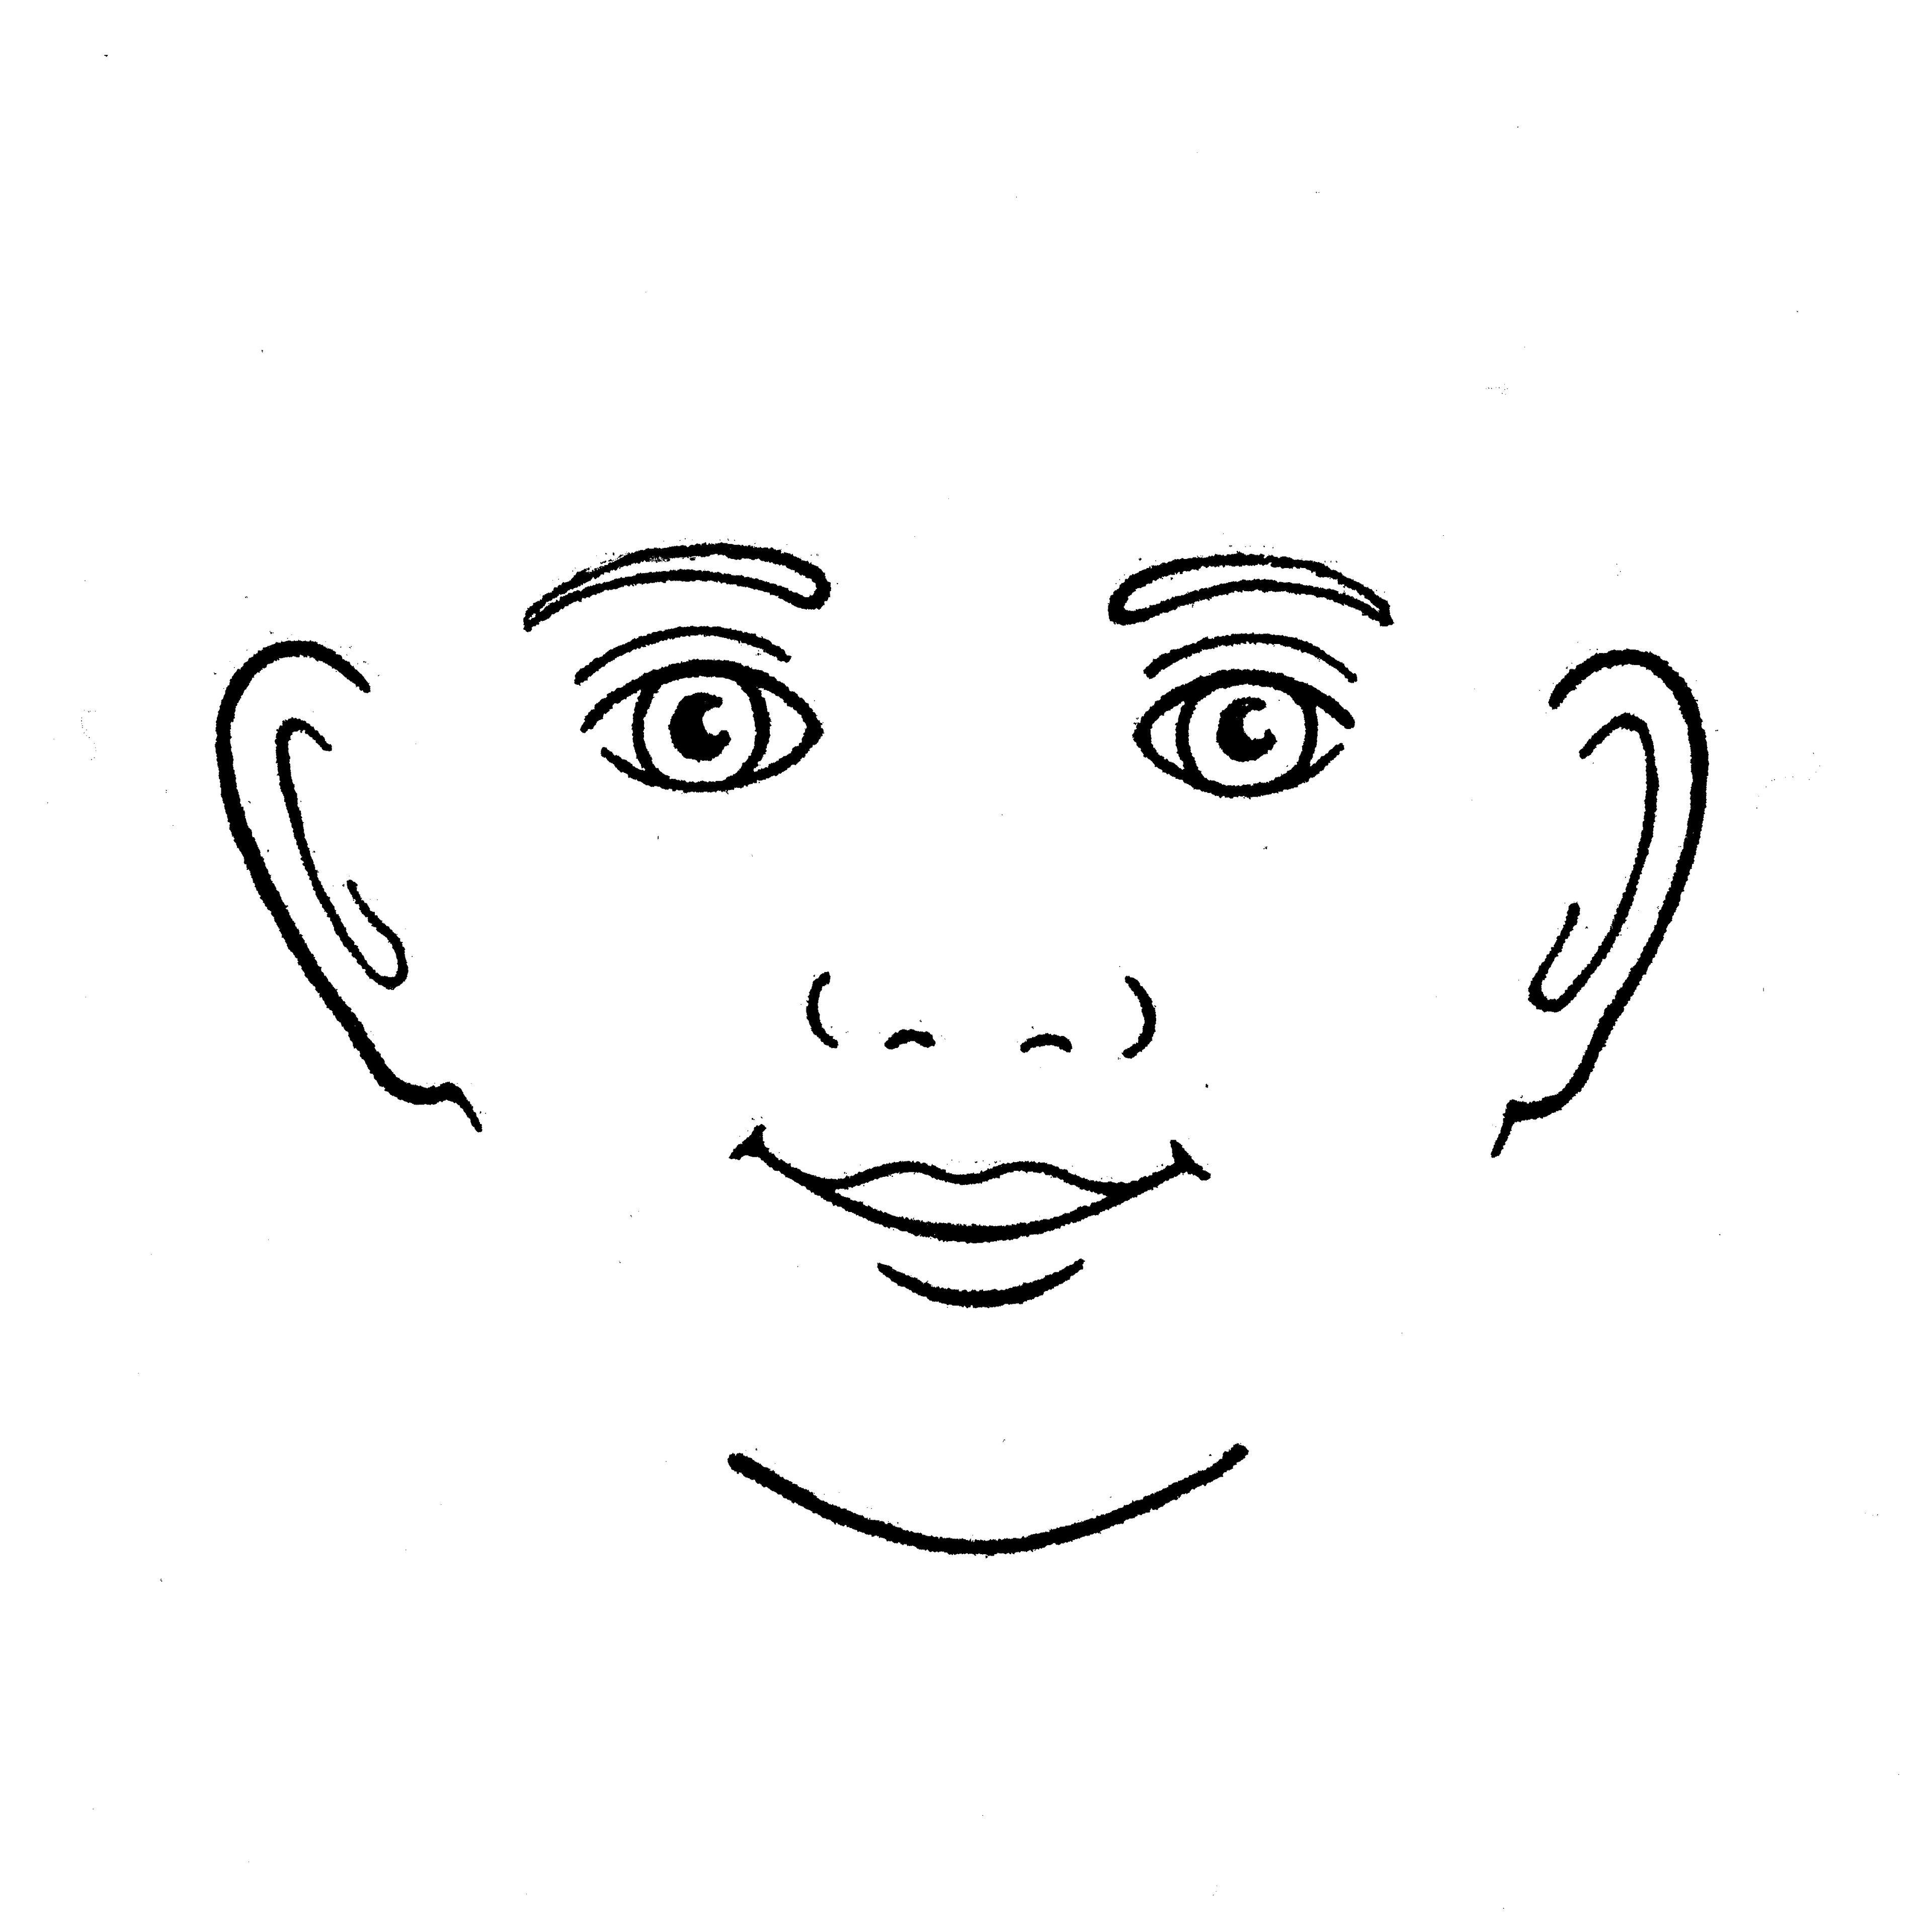 An illustration of a happy face.